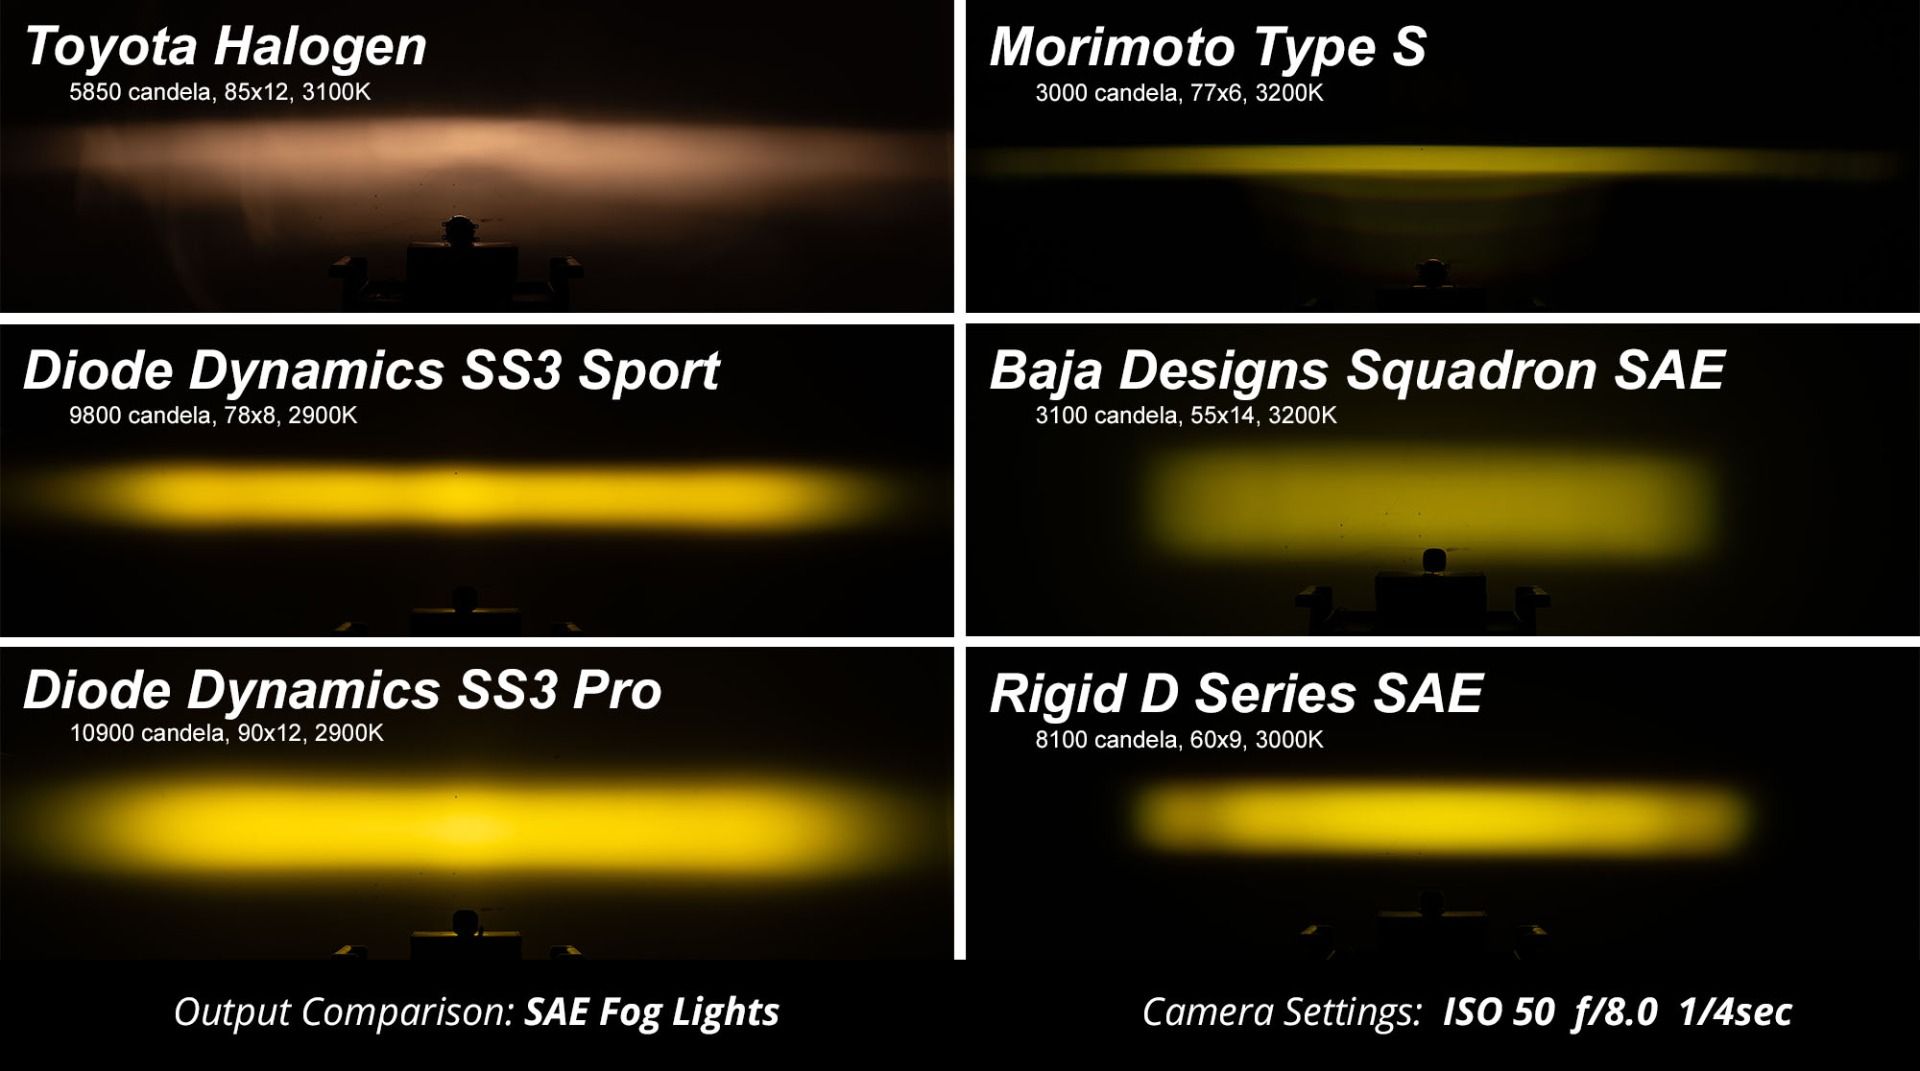 Stage Series 3" SAE Yellow Max LED Pod (one)